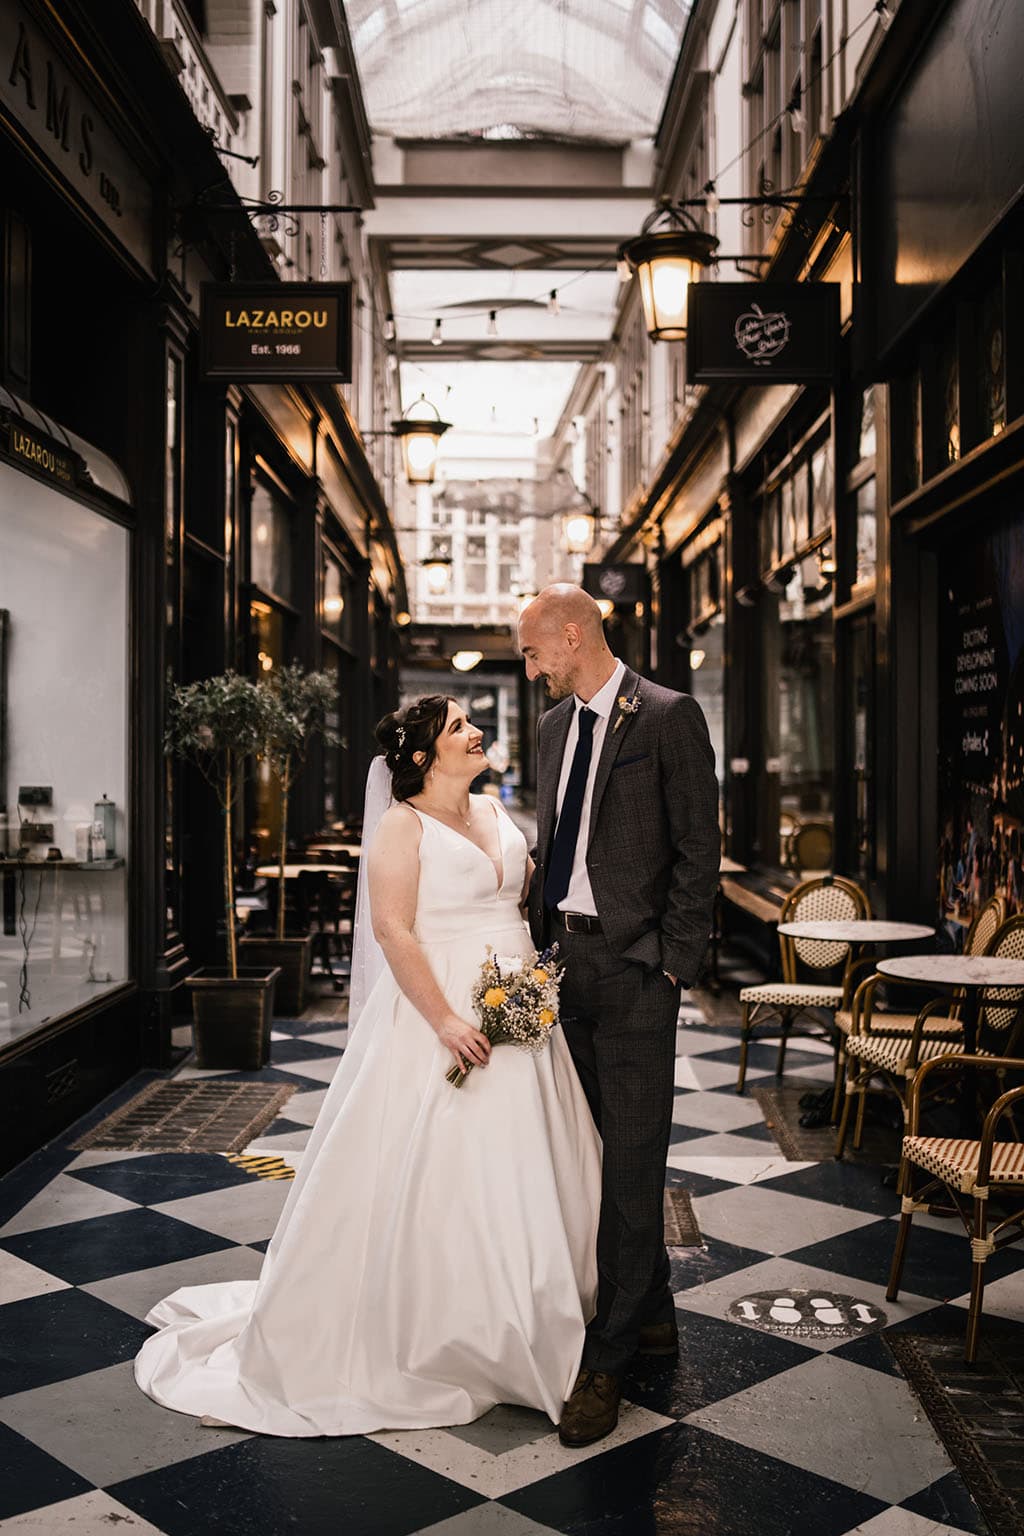 A newlywed couple share an affectionate gaze in a charming vintage-style arcade. the bride in a white gown and the groom in a gray suit clasp hands, surrounded by quaint shopfronts and bistro chairs.